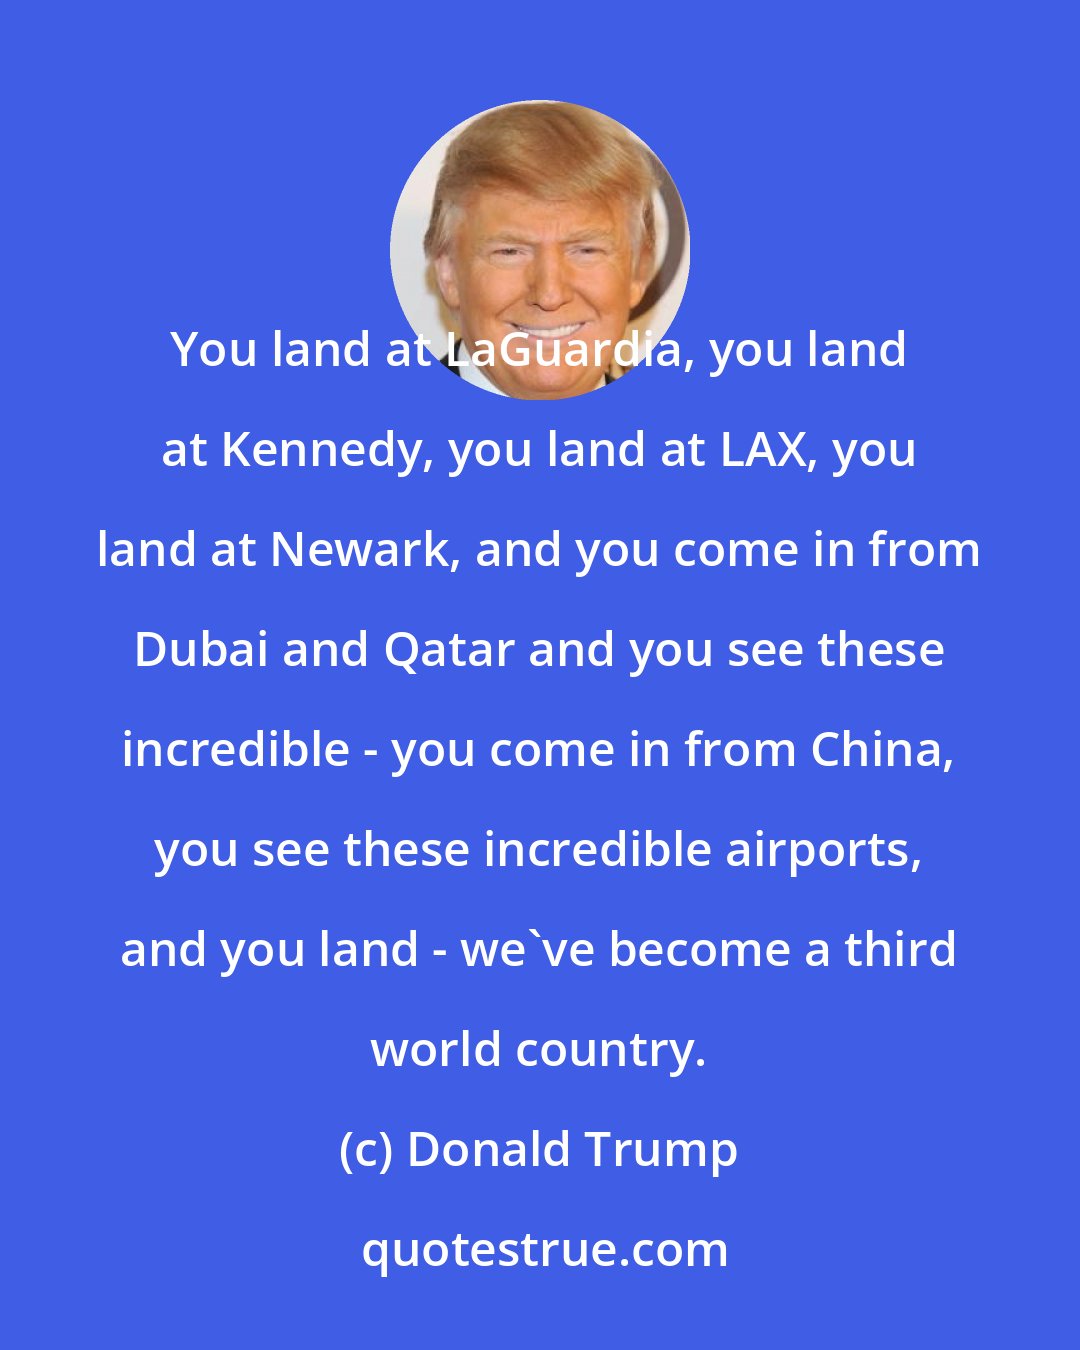 Donald Trump: You land at LaGuardia, you land at Kennedy, you land at LAX, you land at Newark, and you come in from Dubai and Qatar and you see these incredible - you come in from China, you see these incredible airports, and you land - we've become a third world country.